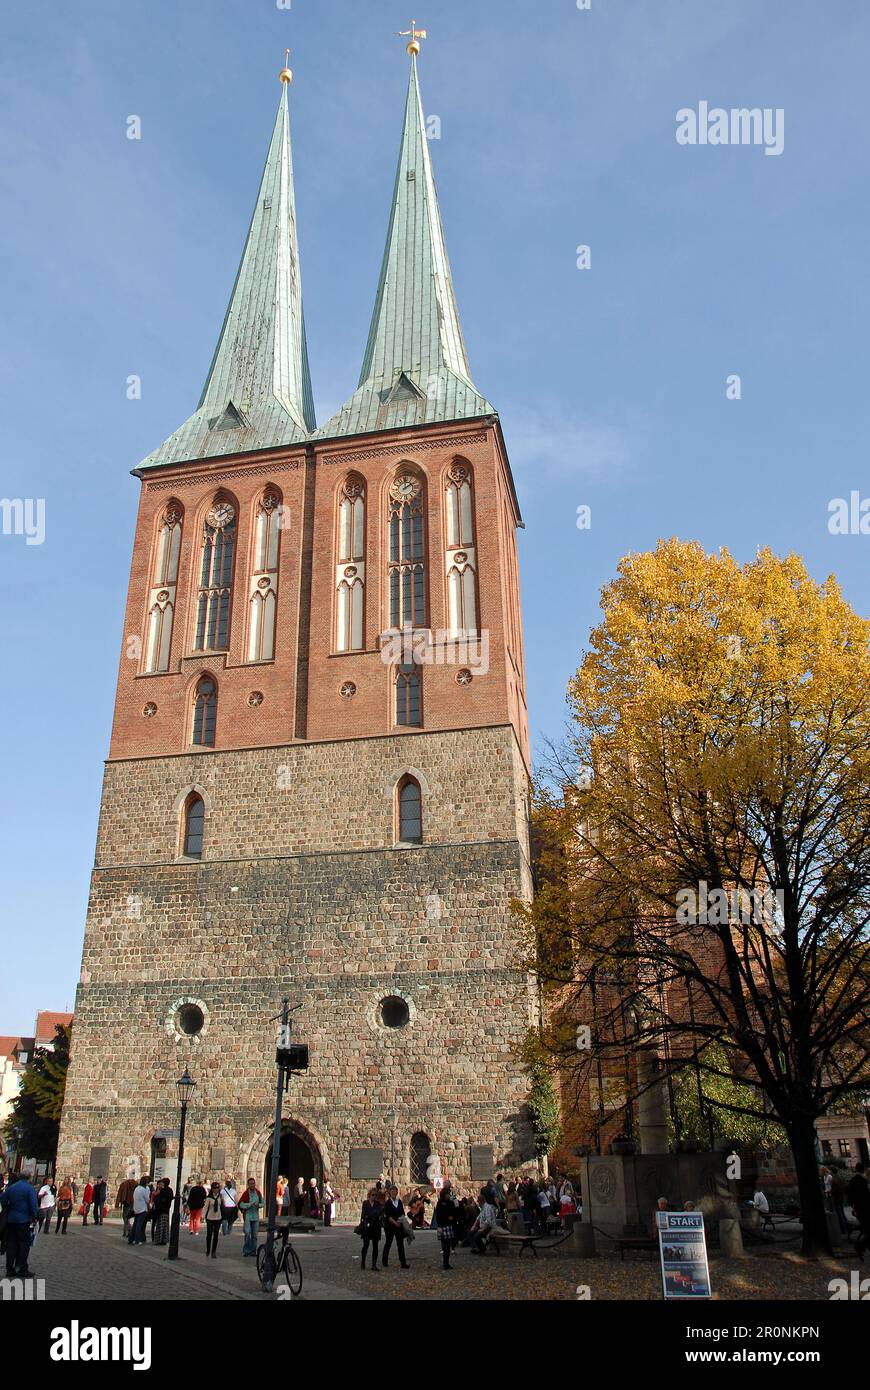 Berlin, Germany: St Nicholas Church museum with its twin spires in the Nikolai Quarter, the oldest part of the city. Stock Photo